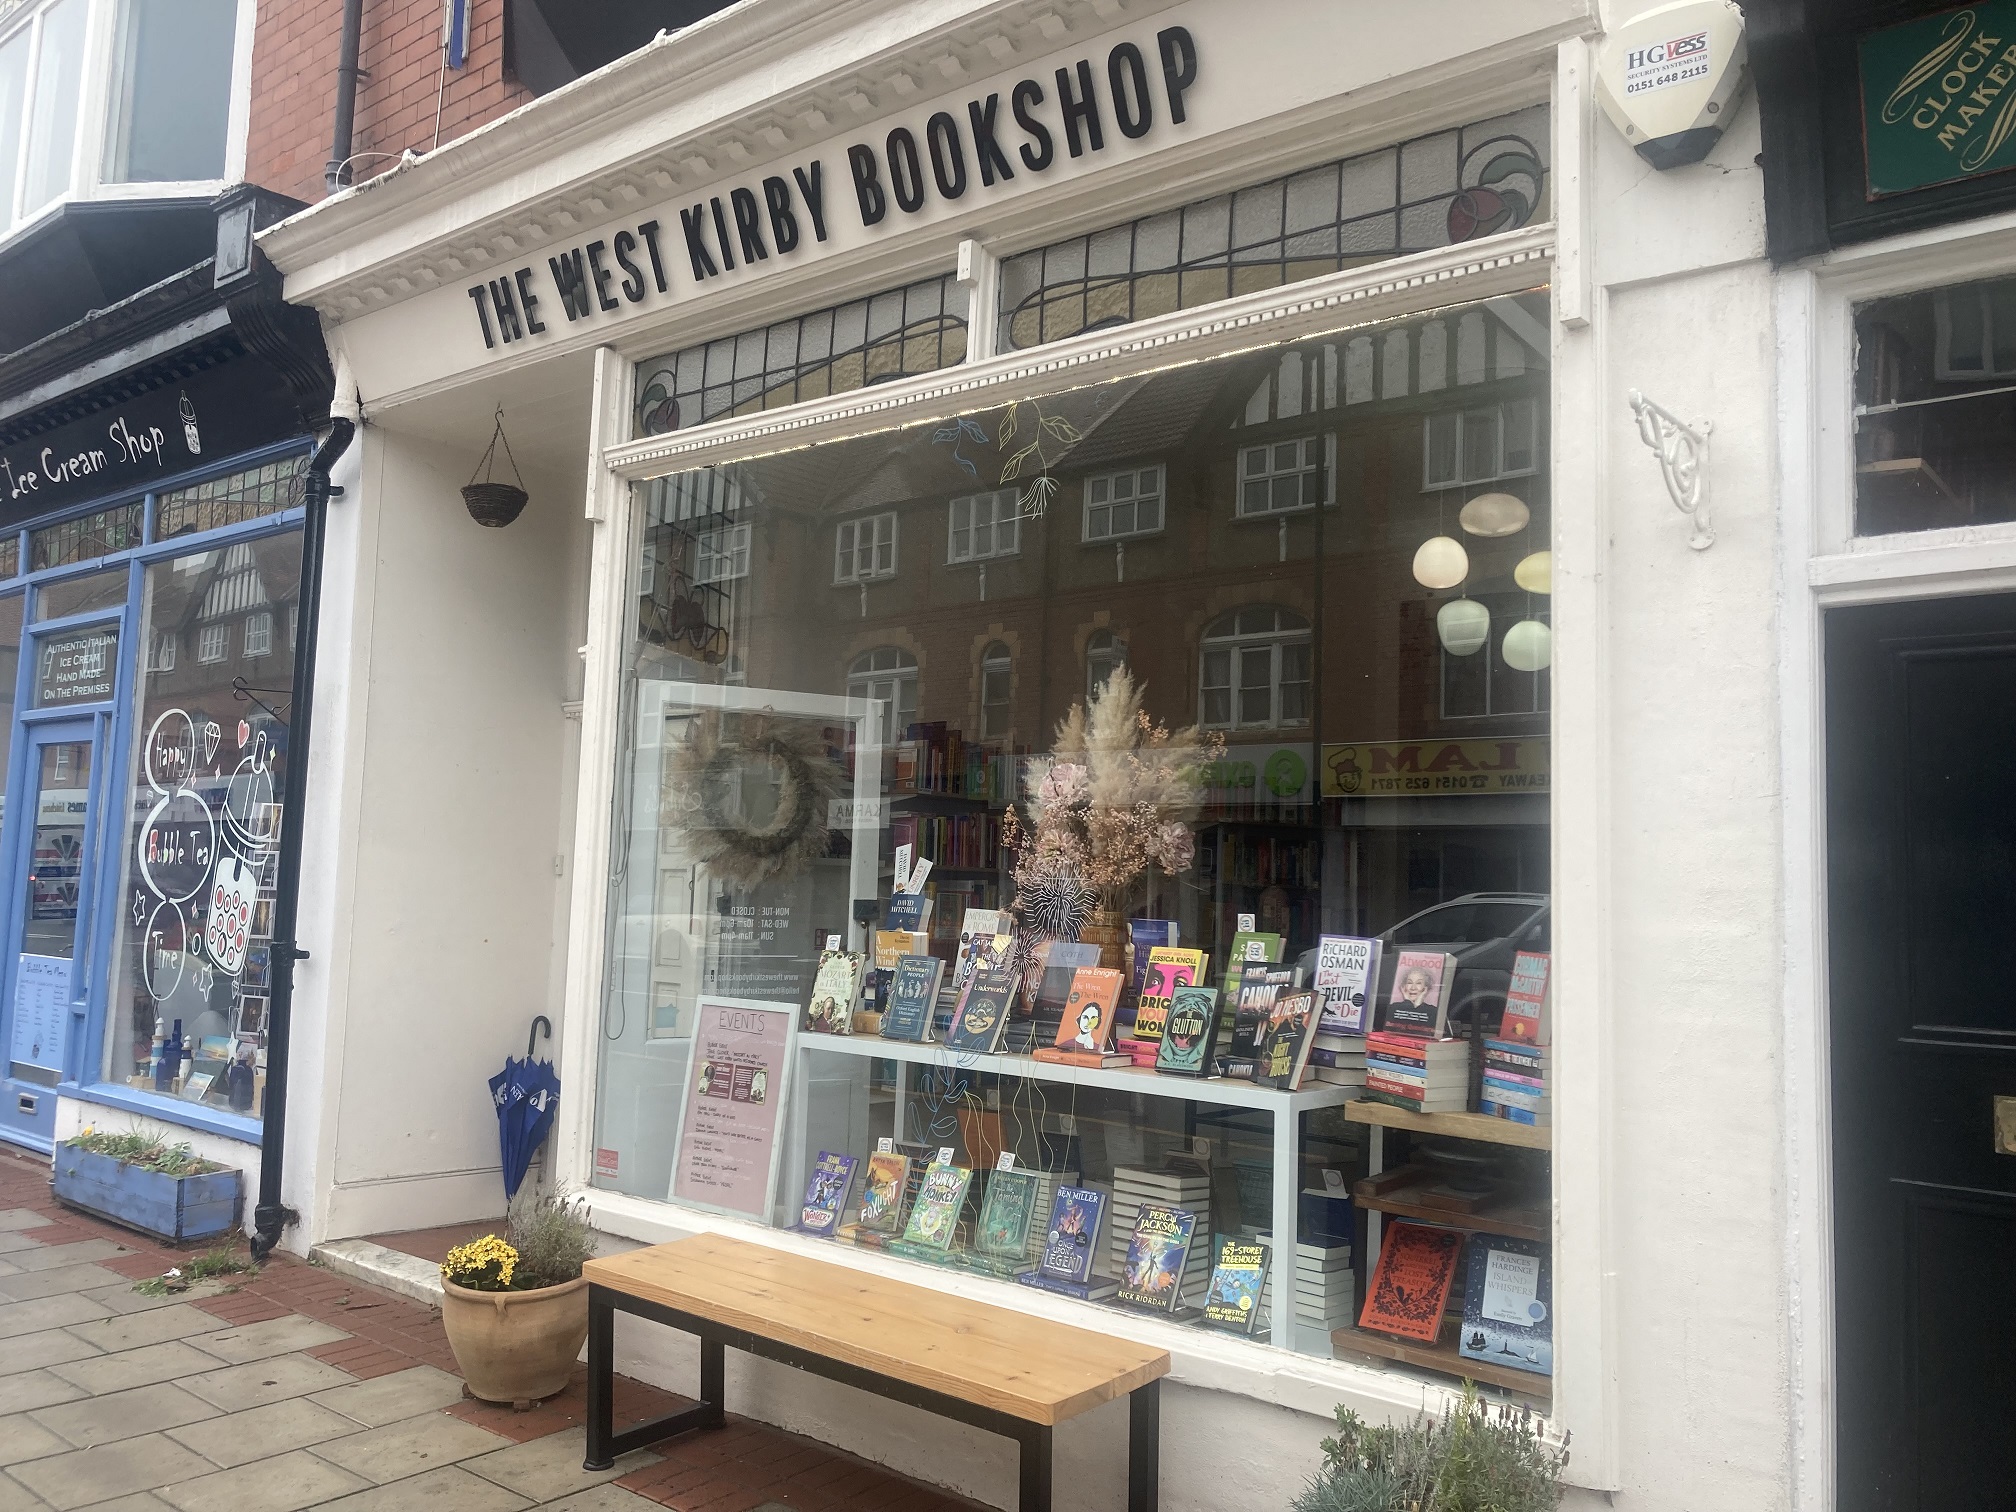 Bookshop Day to be celebrated in West Kirby